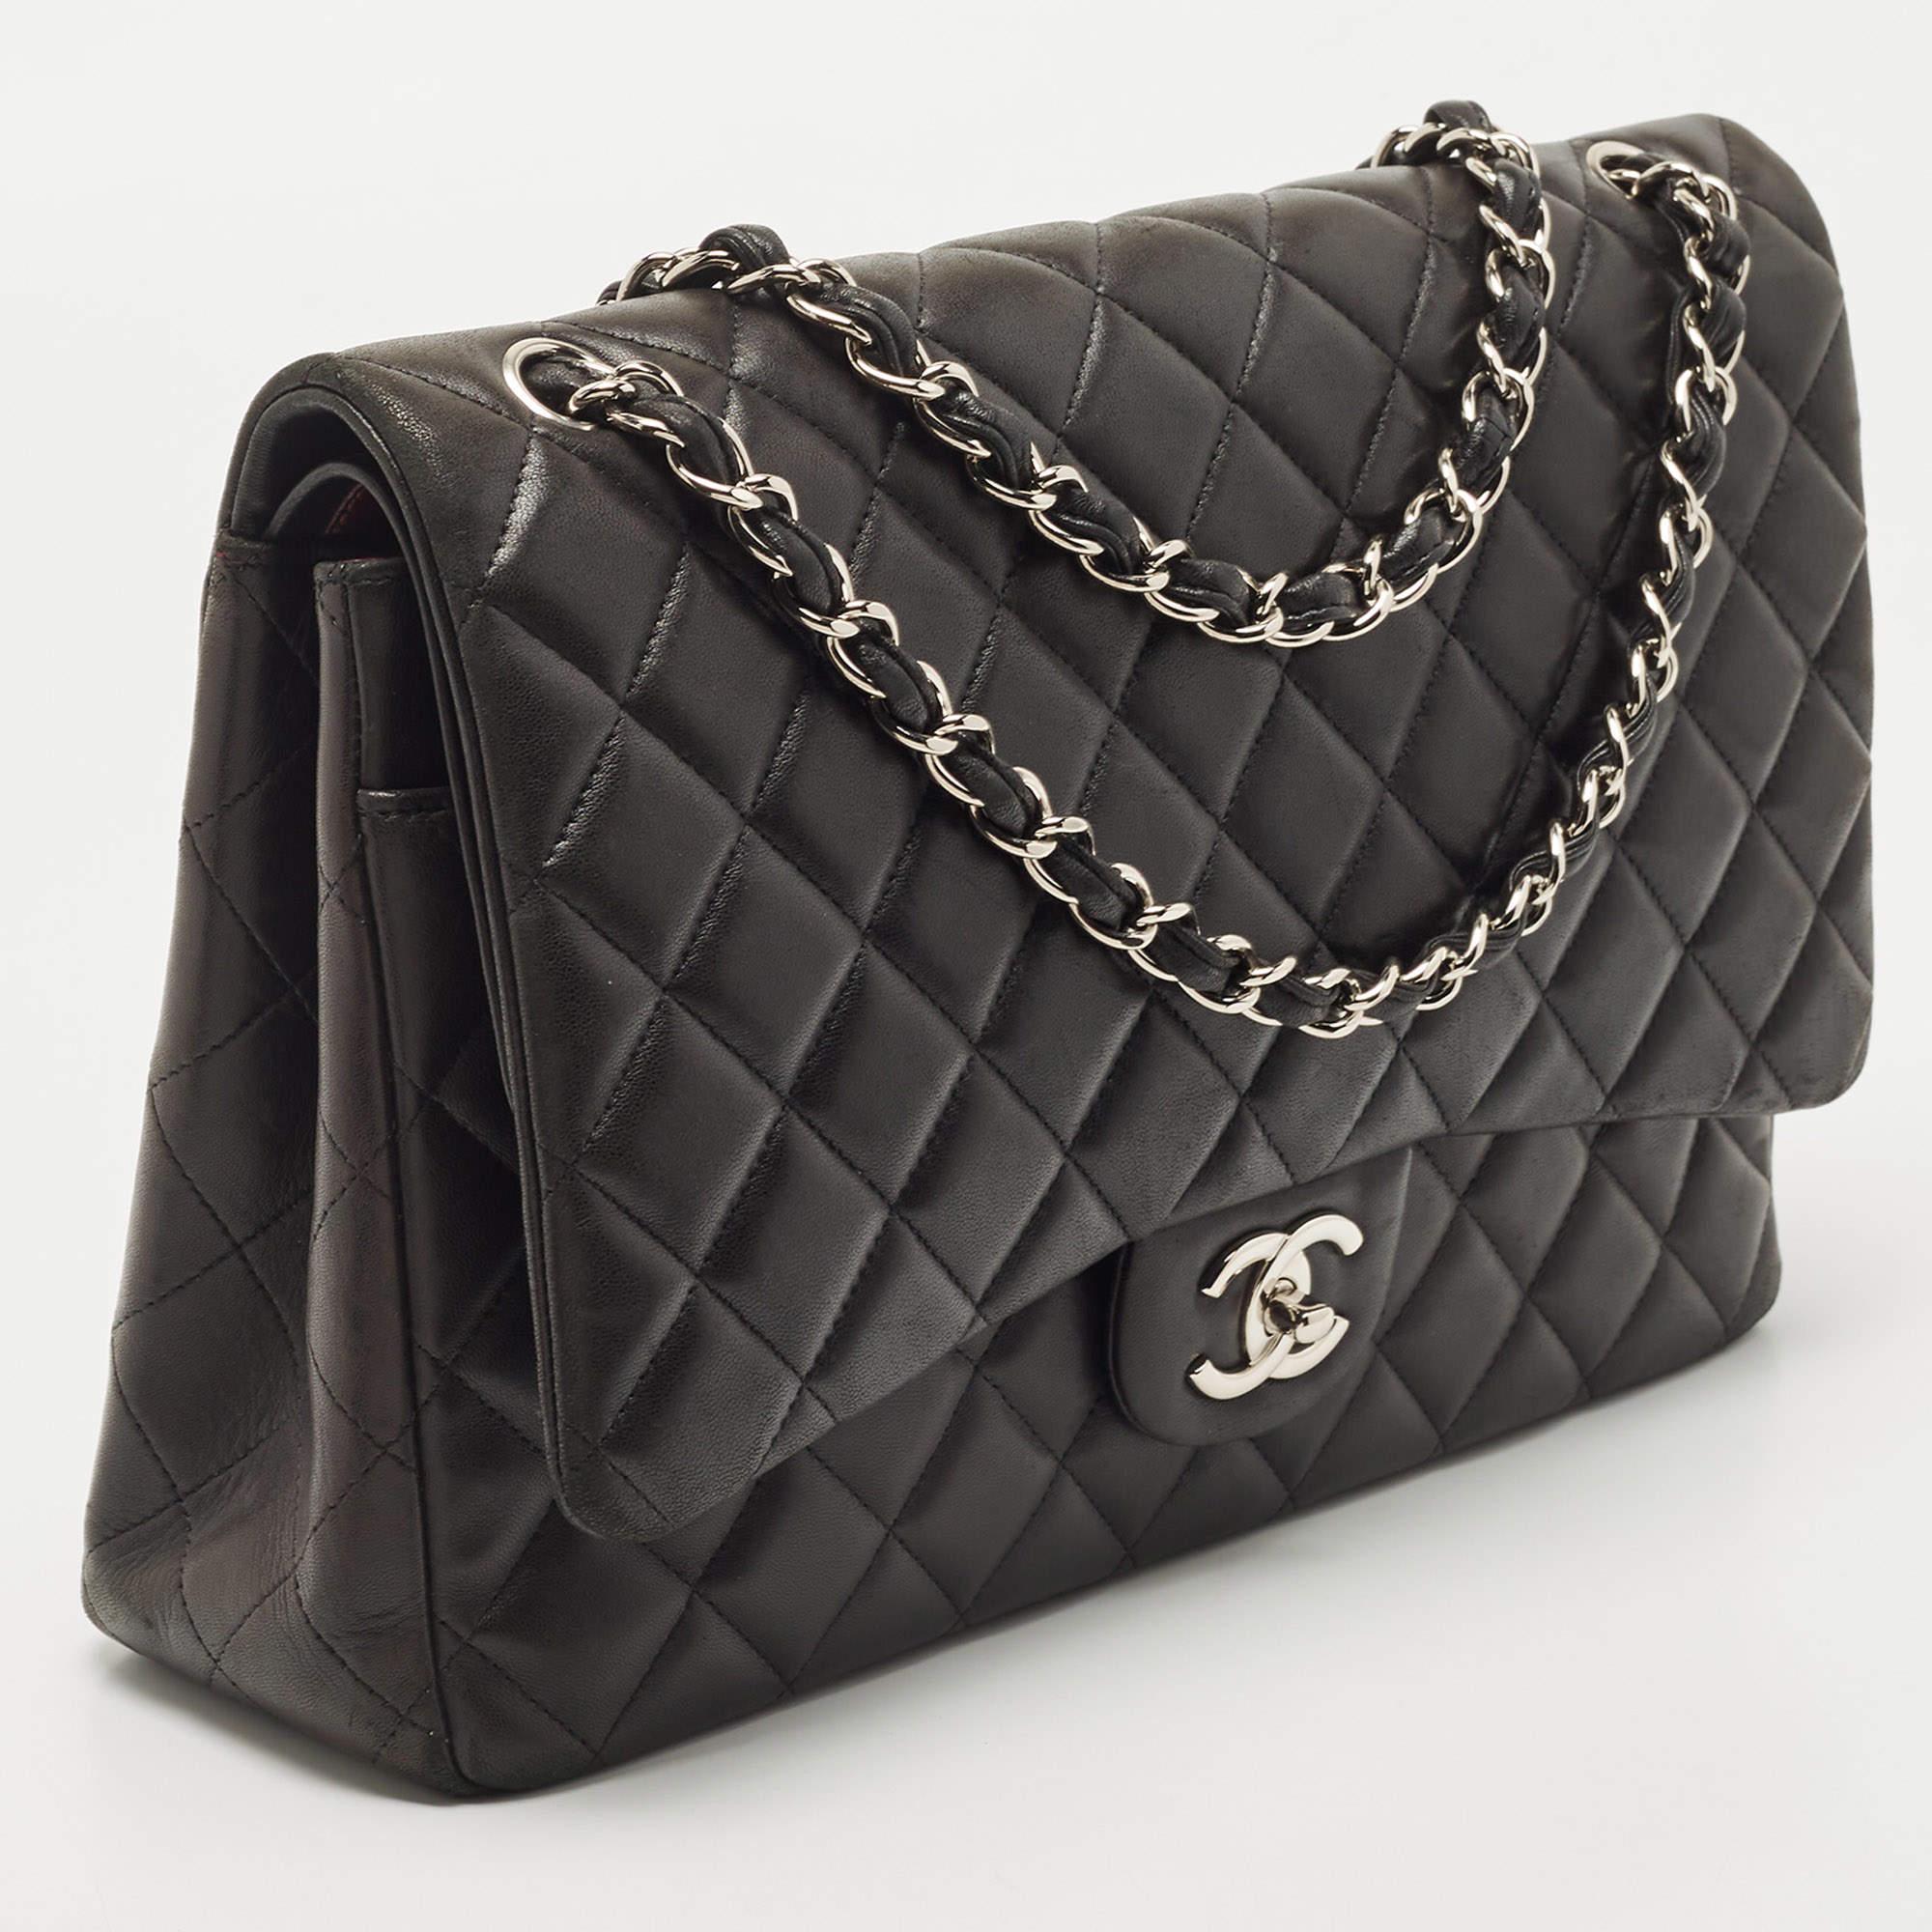 Women's Chanel Black Quilted Lambskin Leather Maxi Classic Double Flap Bag